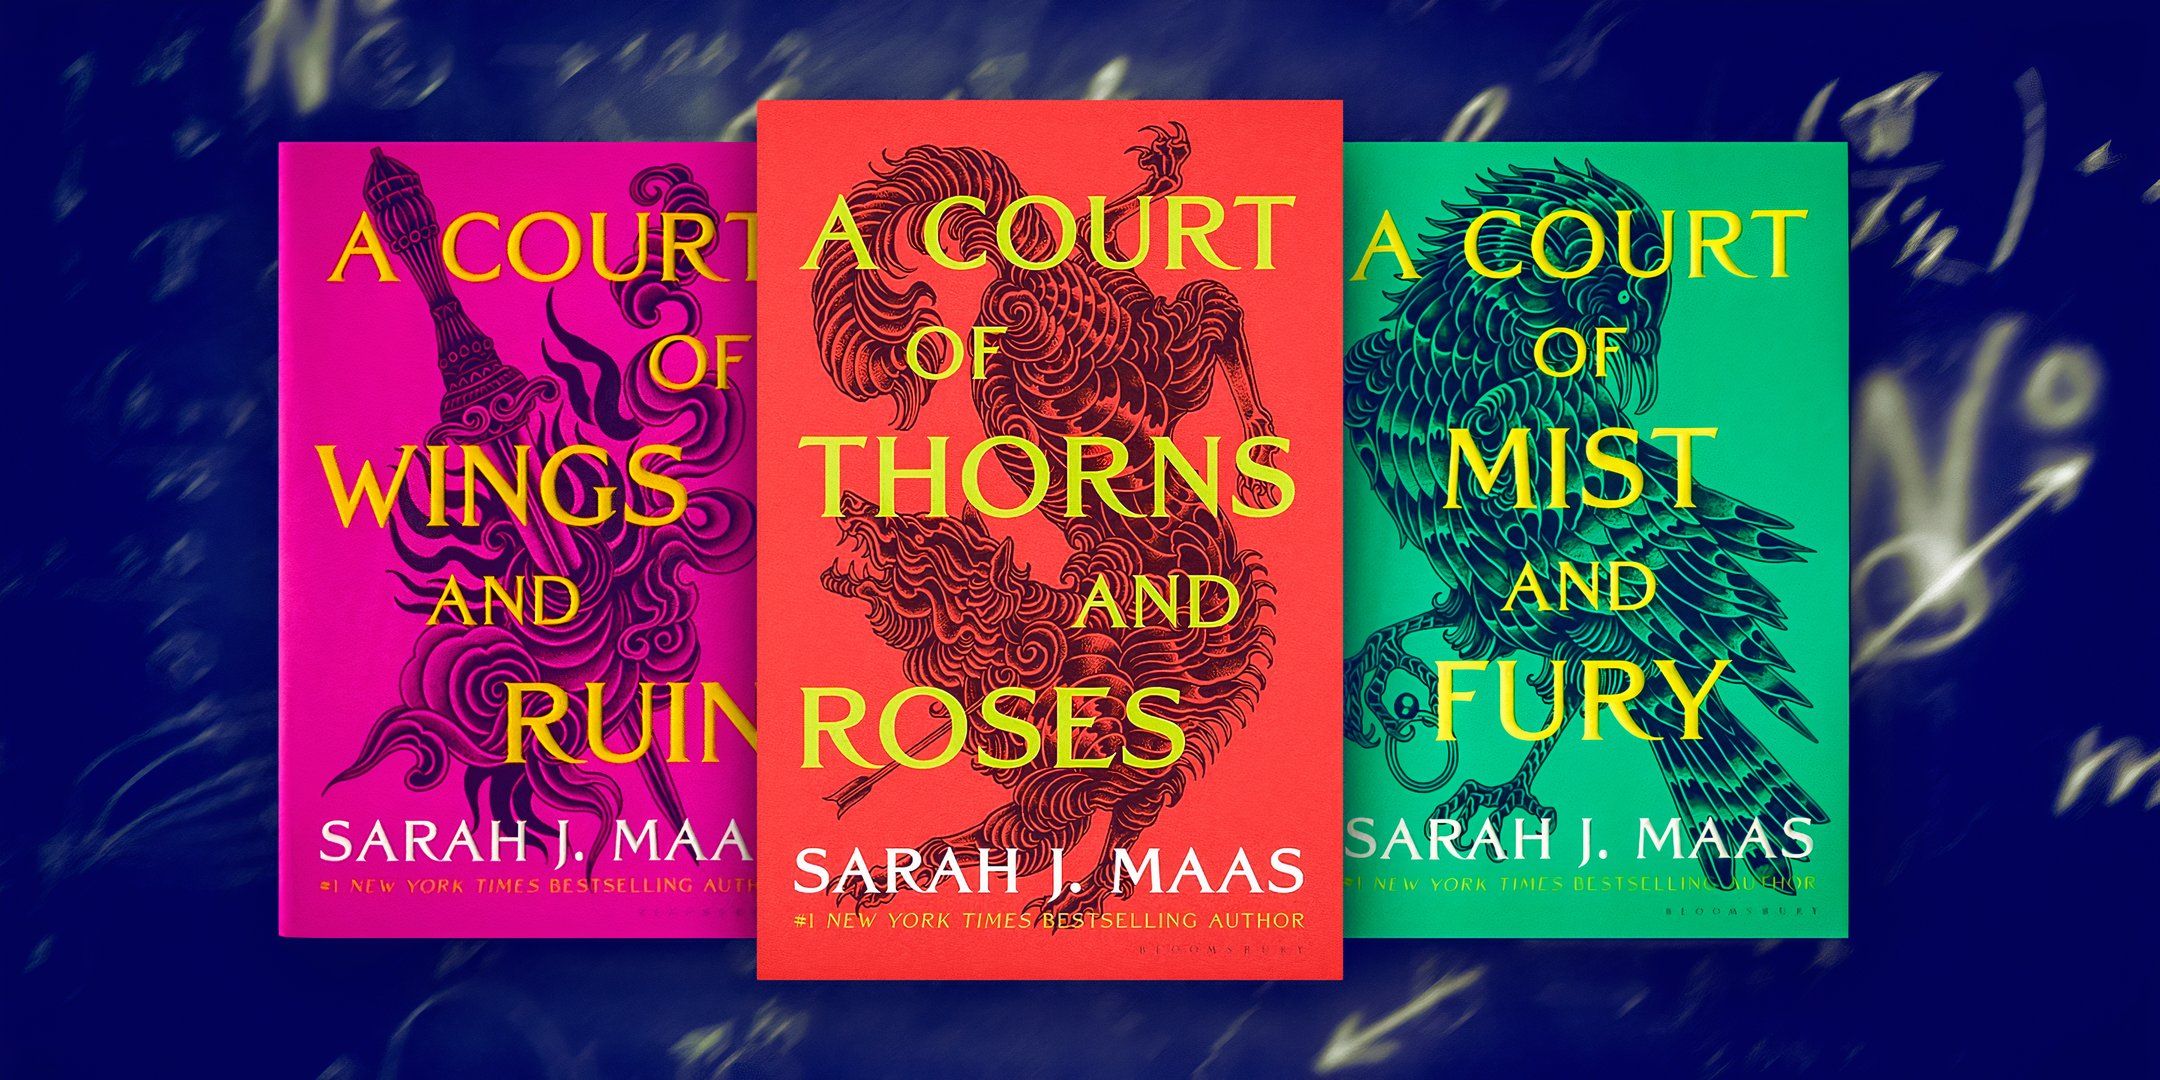 I hope the next Court of Thorns & Roses book confirms this brilliant Elain theory